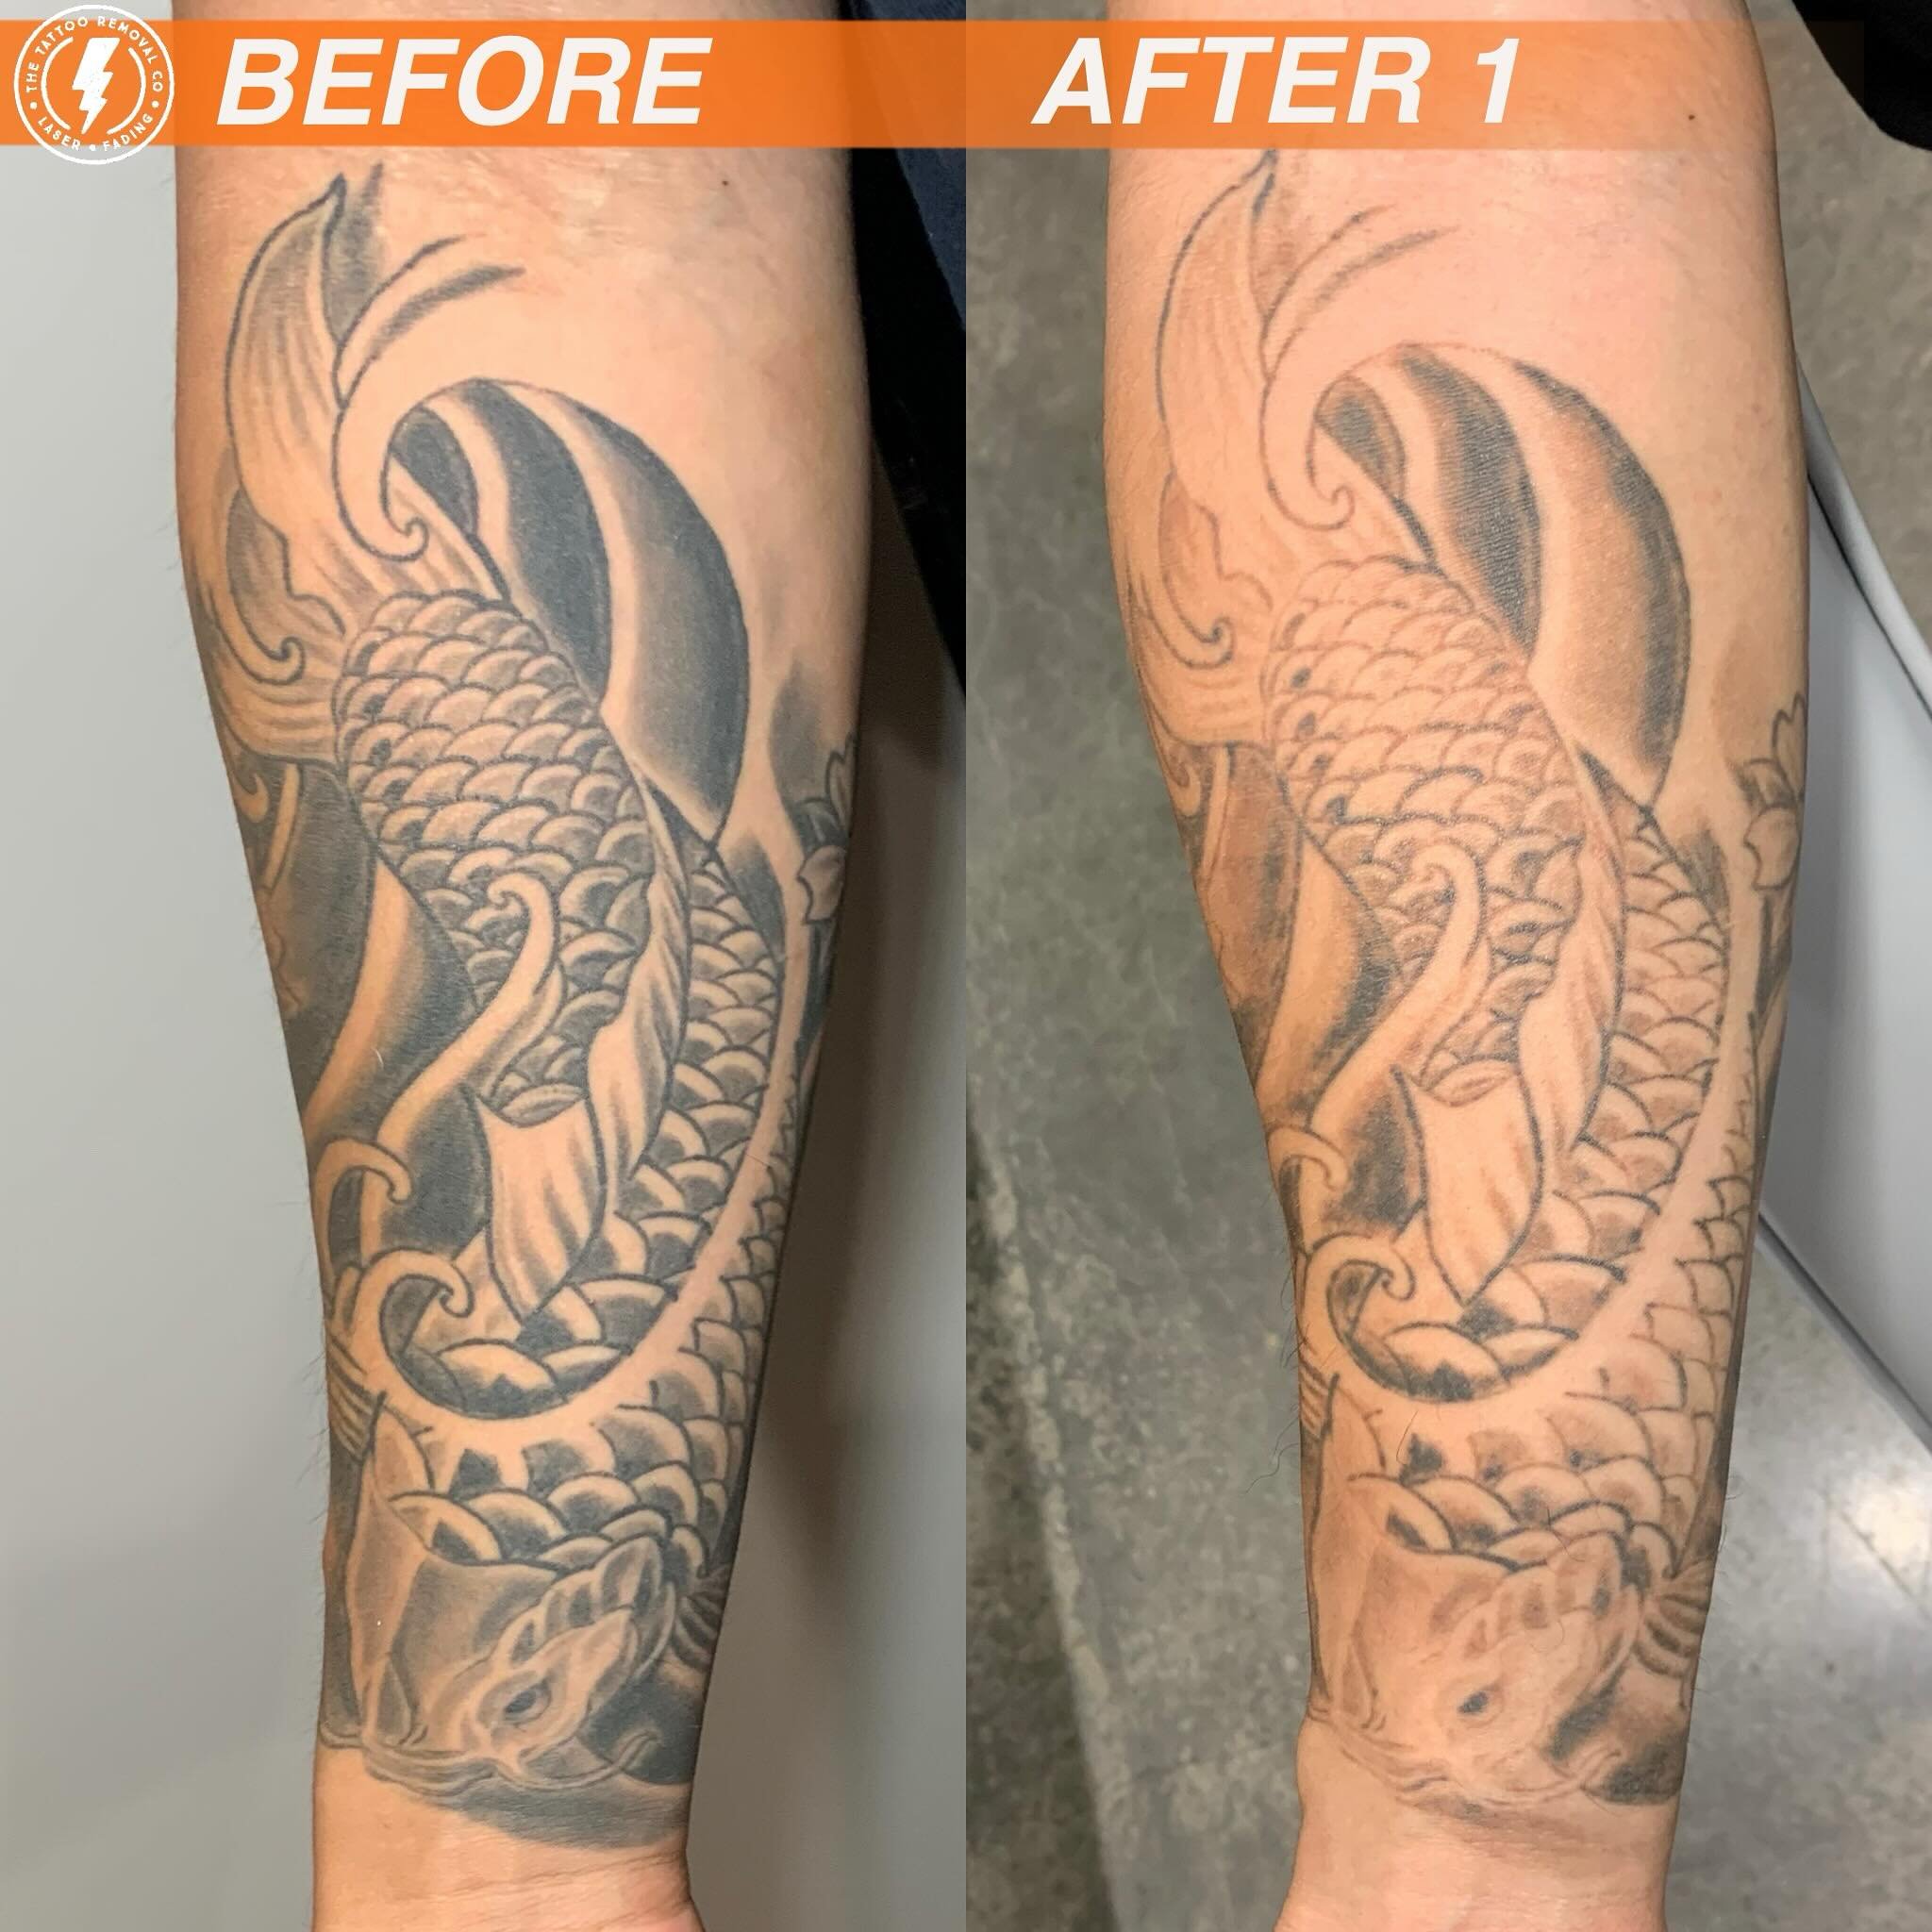 BEFORE/AFTER 1 TREATMENT💥

Ohhhh the shading got smashed!

⚡️Fabulous result so far. These are the results you get with our experienced and knowledgeable Laser Technician @philly_ttrc_pagdin ⚡️

Consultations are FREE please don&rsquo;t hesitate to 